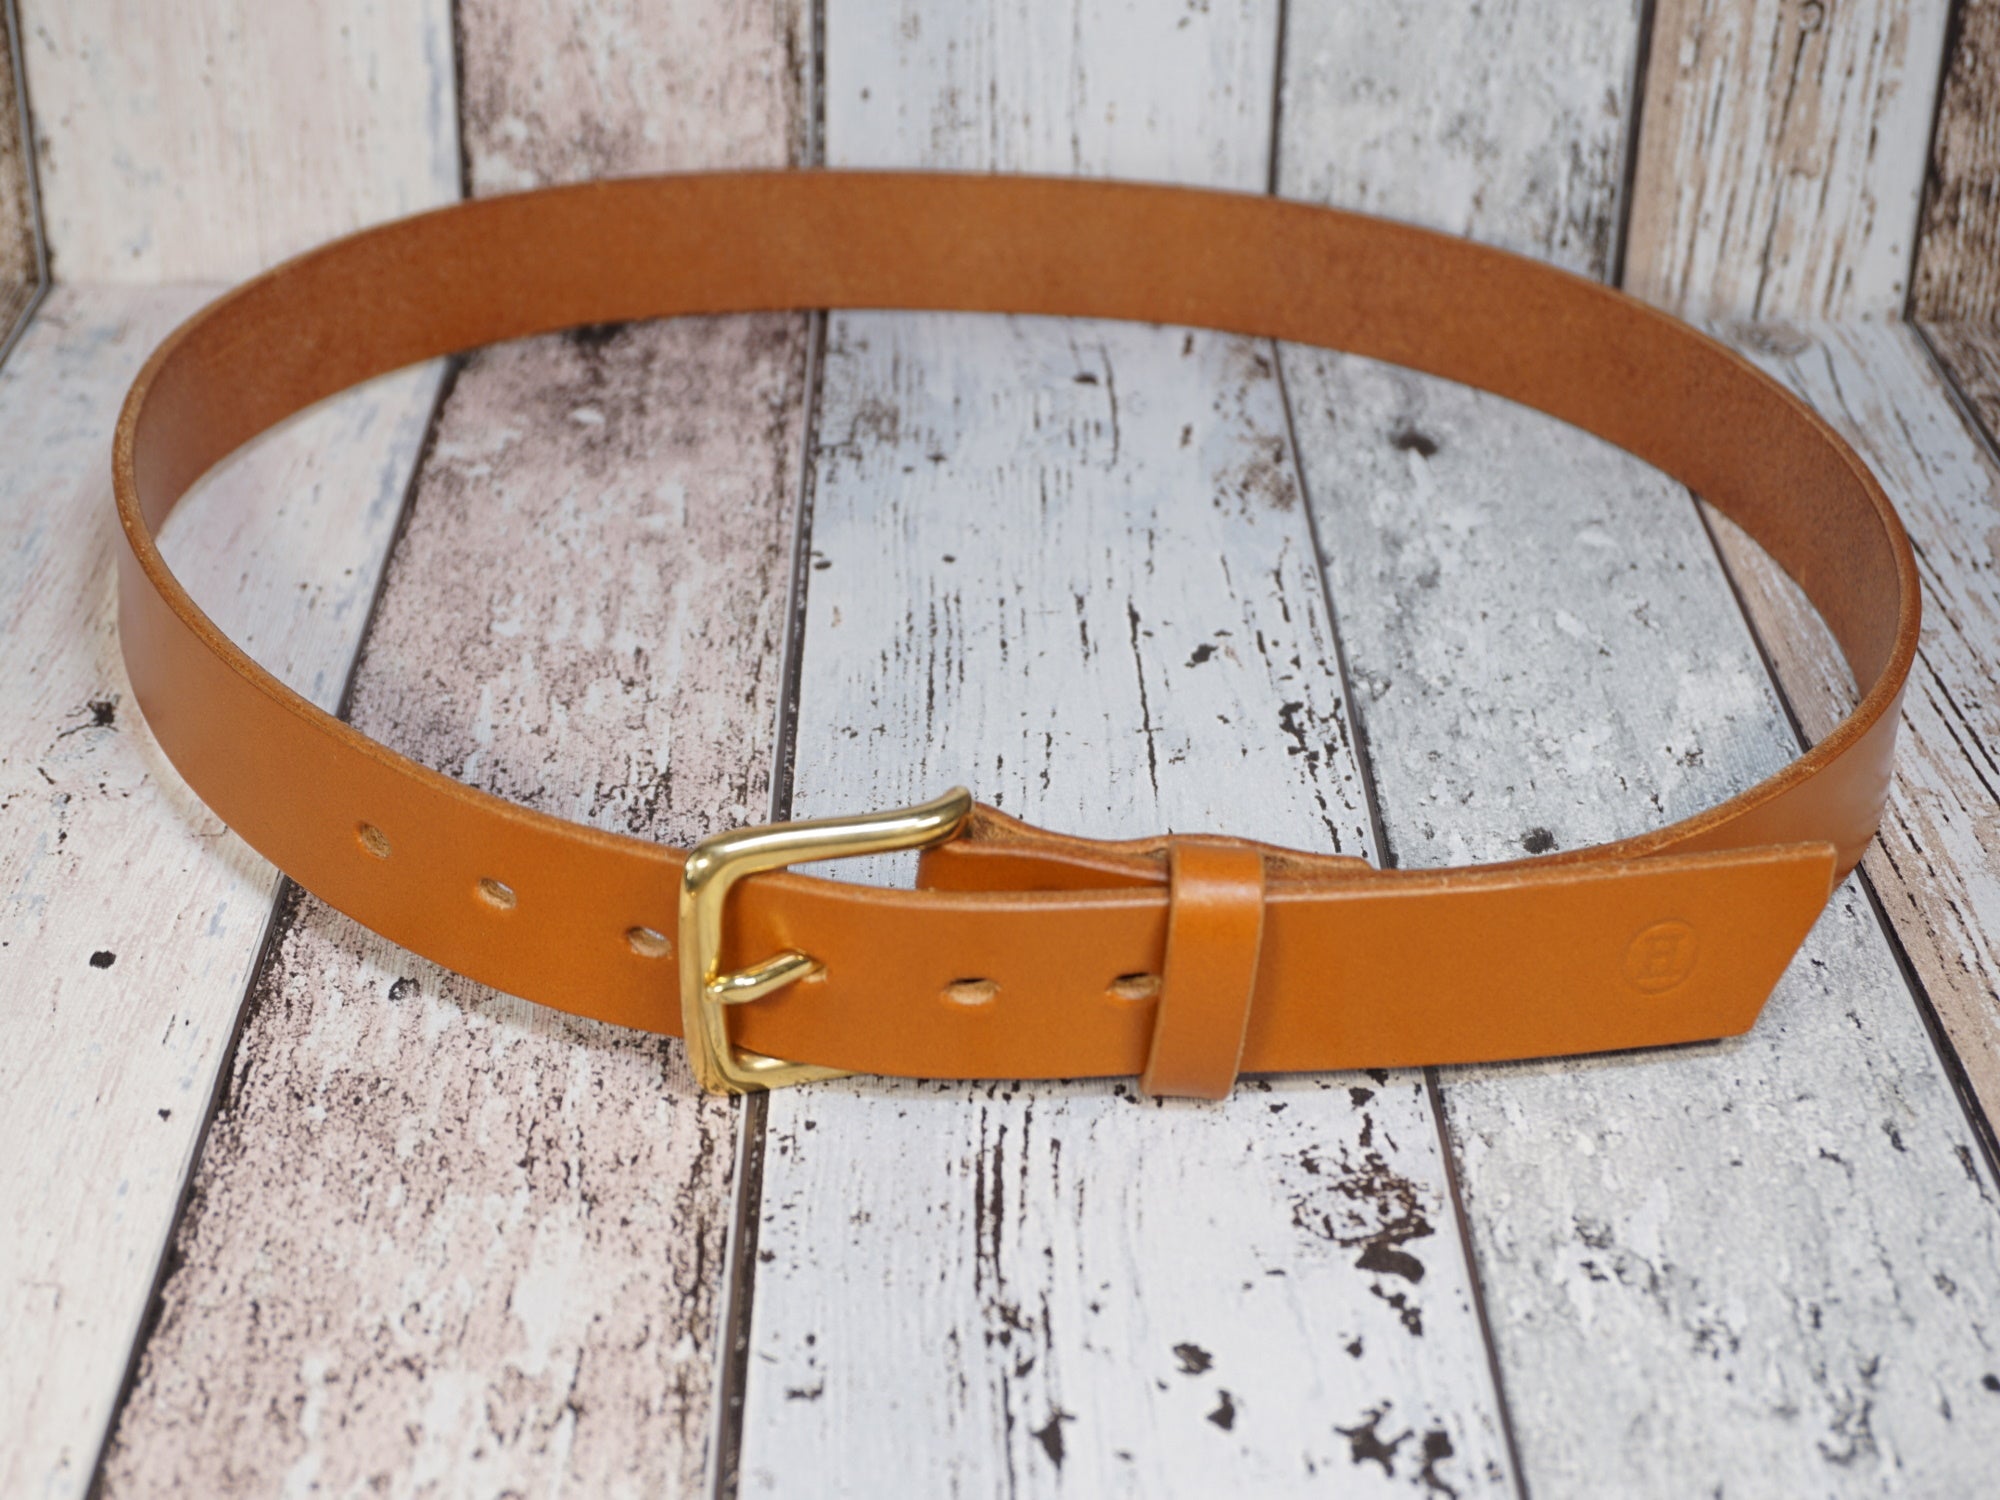 Sedgwick Leather belt in Tan with Brass Buckle